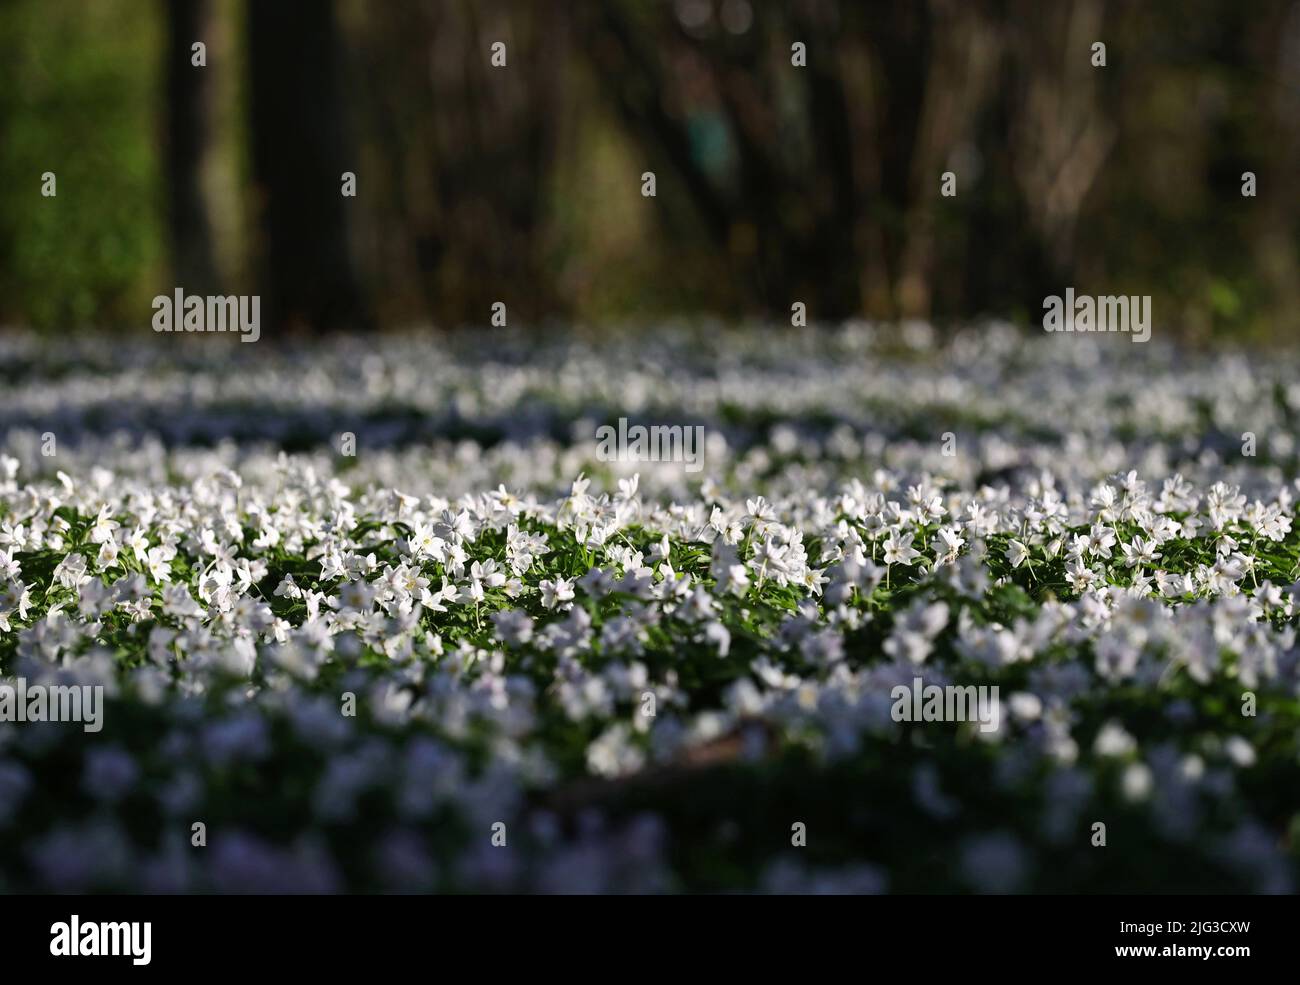 Many people are out in the nature in these corona times. Here a sea of wood anemones (Anemone nemorosa) along an exercise track in Bondebacka, Motala, Sweden. Stock Photo